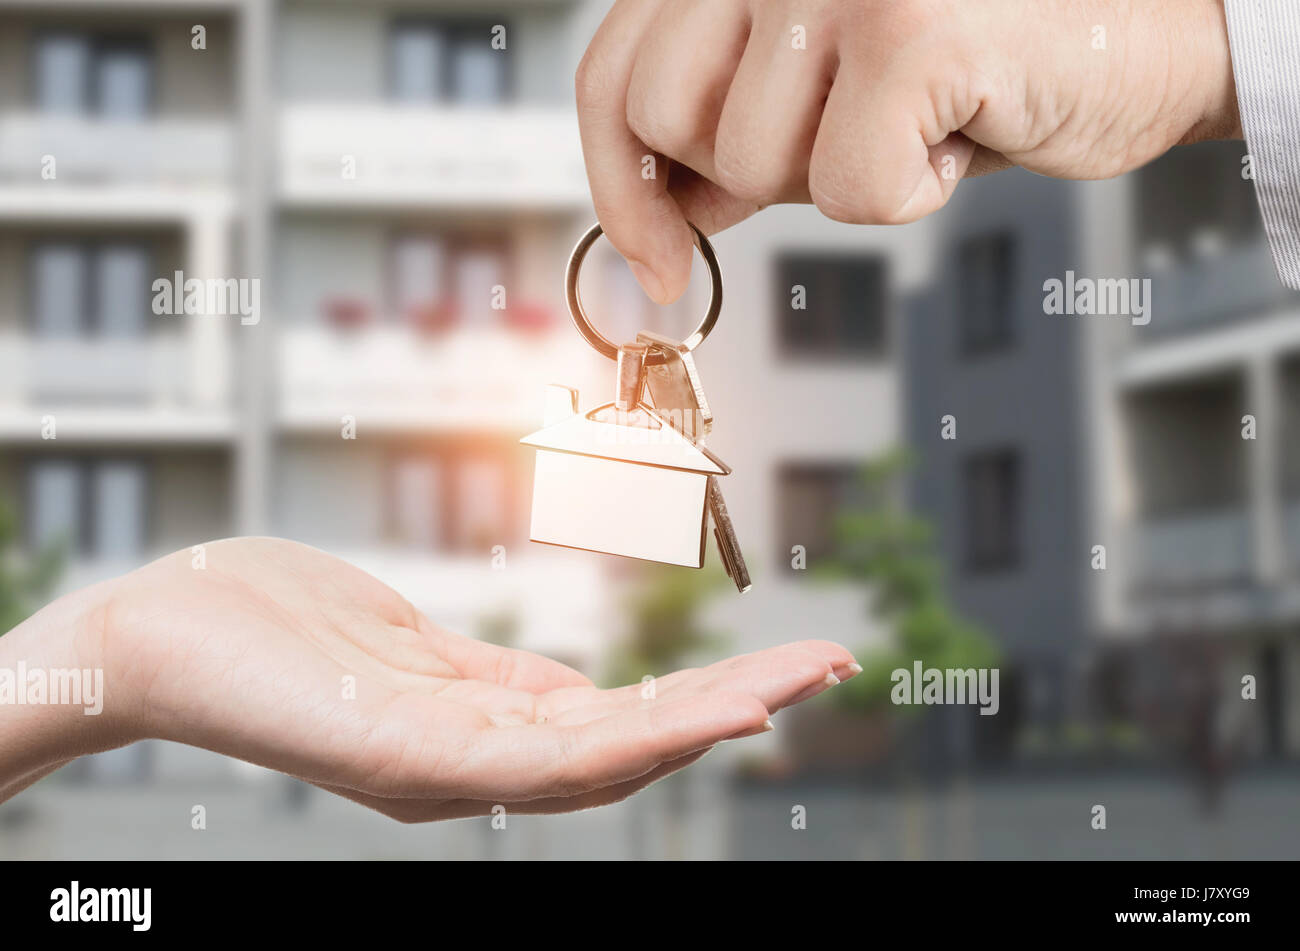 Man gives a woman the keys to a new home. Chrome pedant with house shape Stock Photo